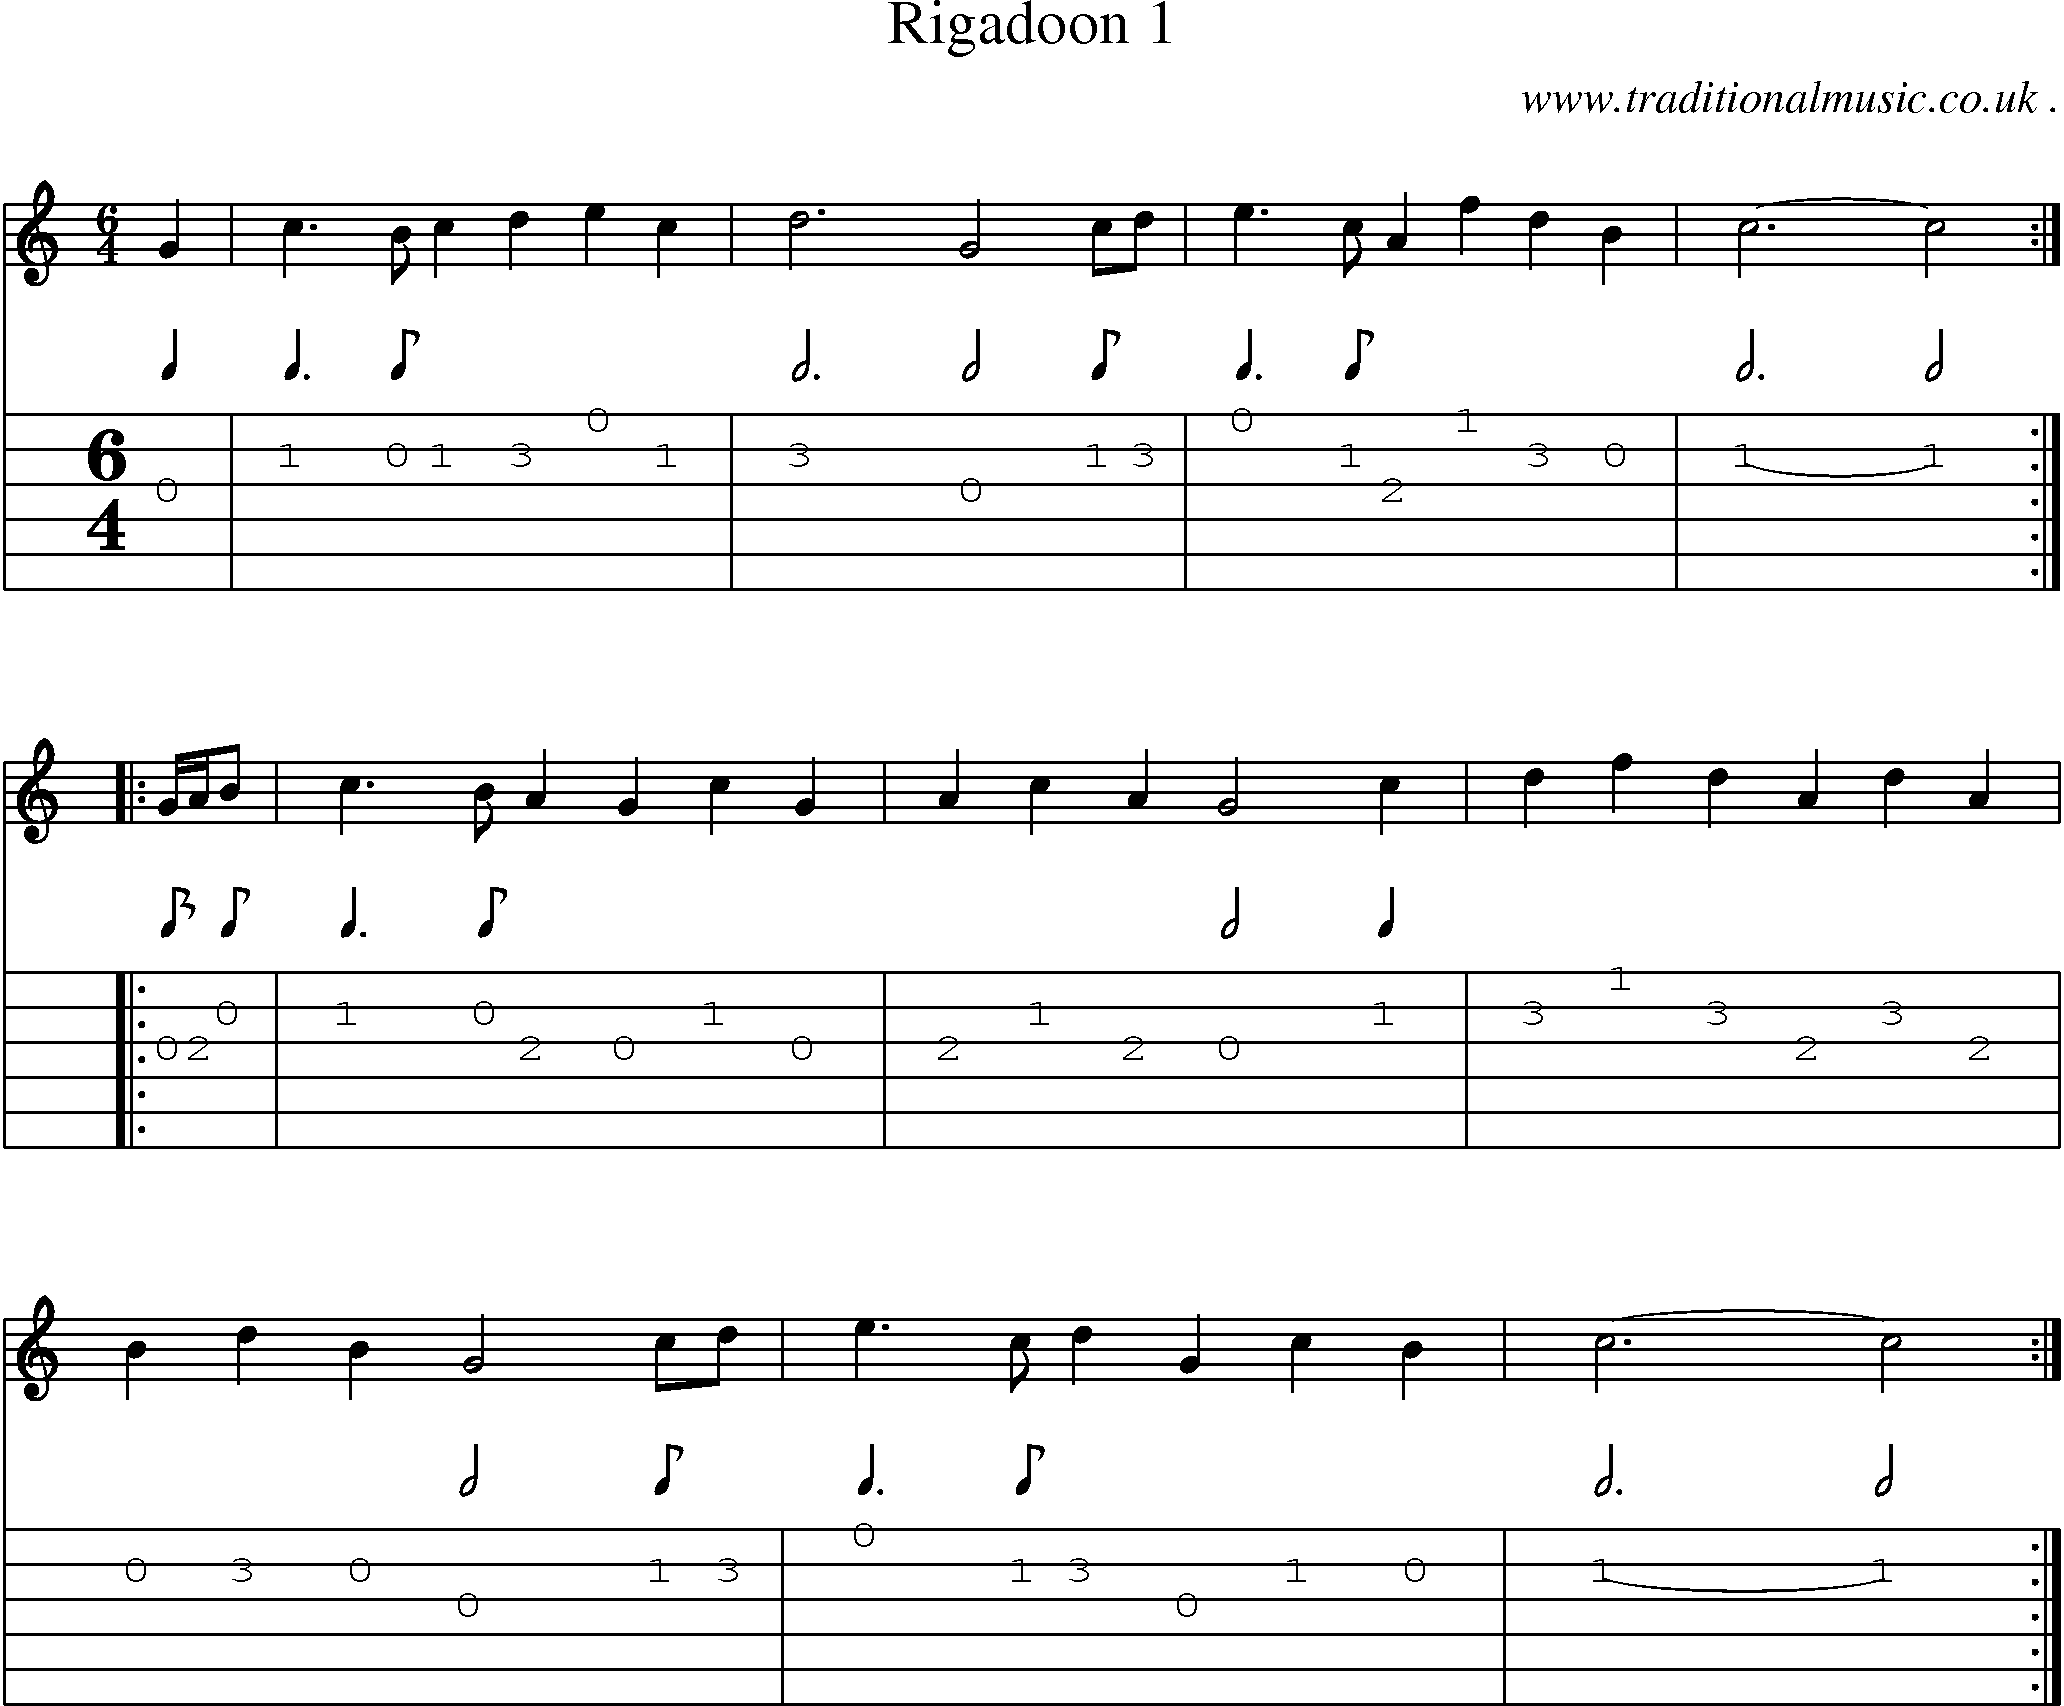 Sheet-Music and Guitar Tabs for Rigadoon 1